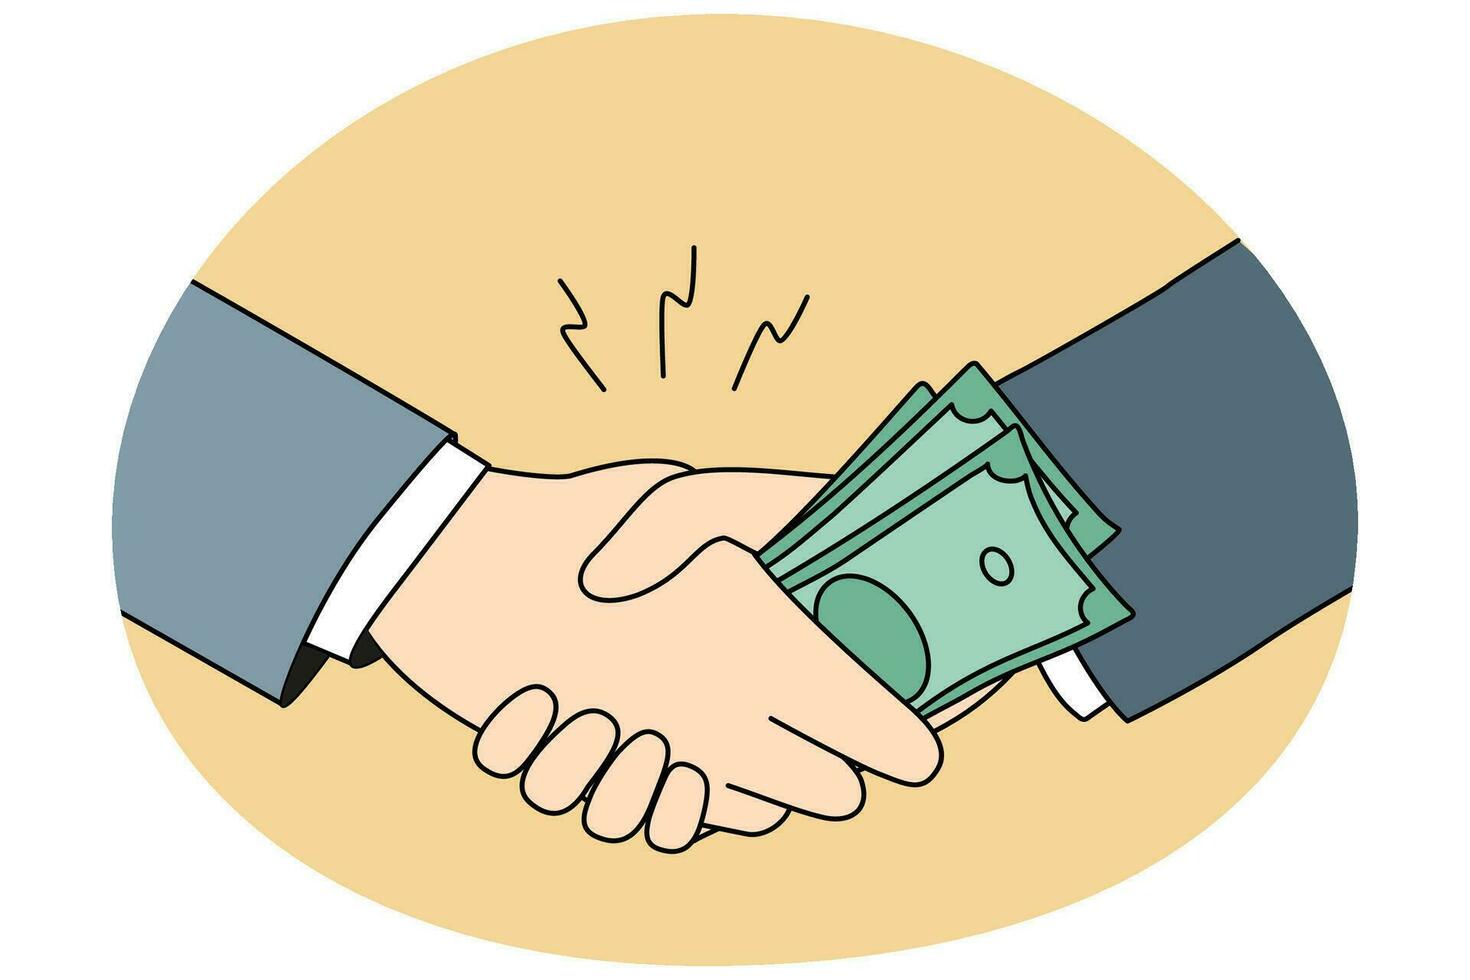 Businessmen shaking hands giving money bribe. Close-up of male business partners handshake closing deal. Financial bribery concept. Vector illustration.